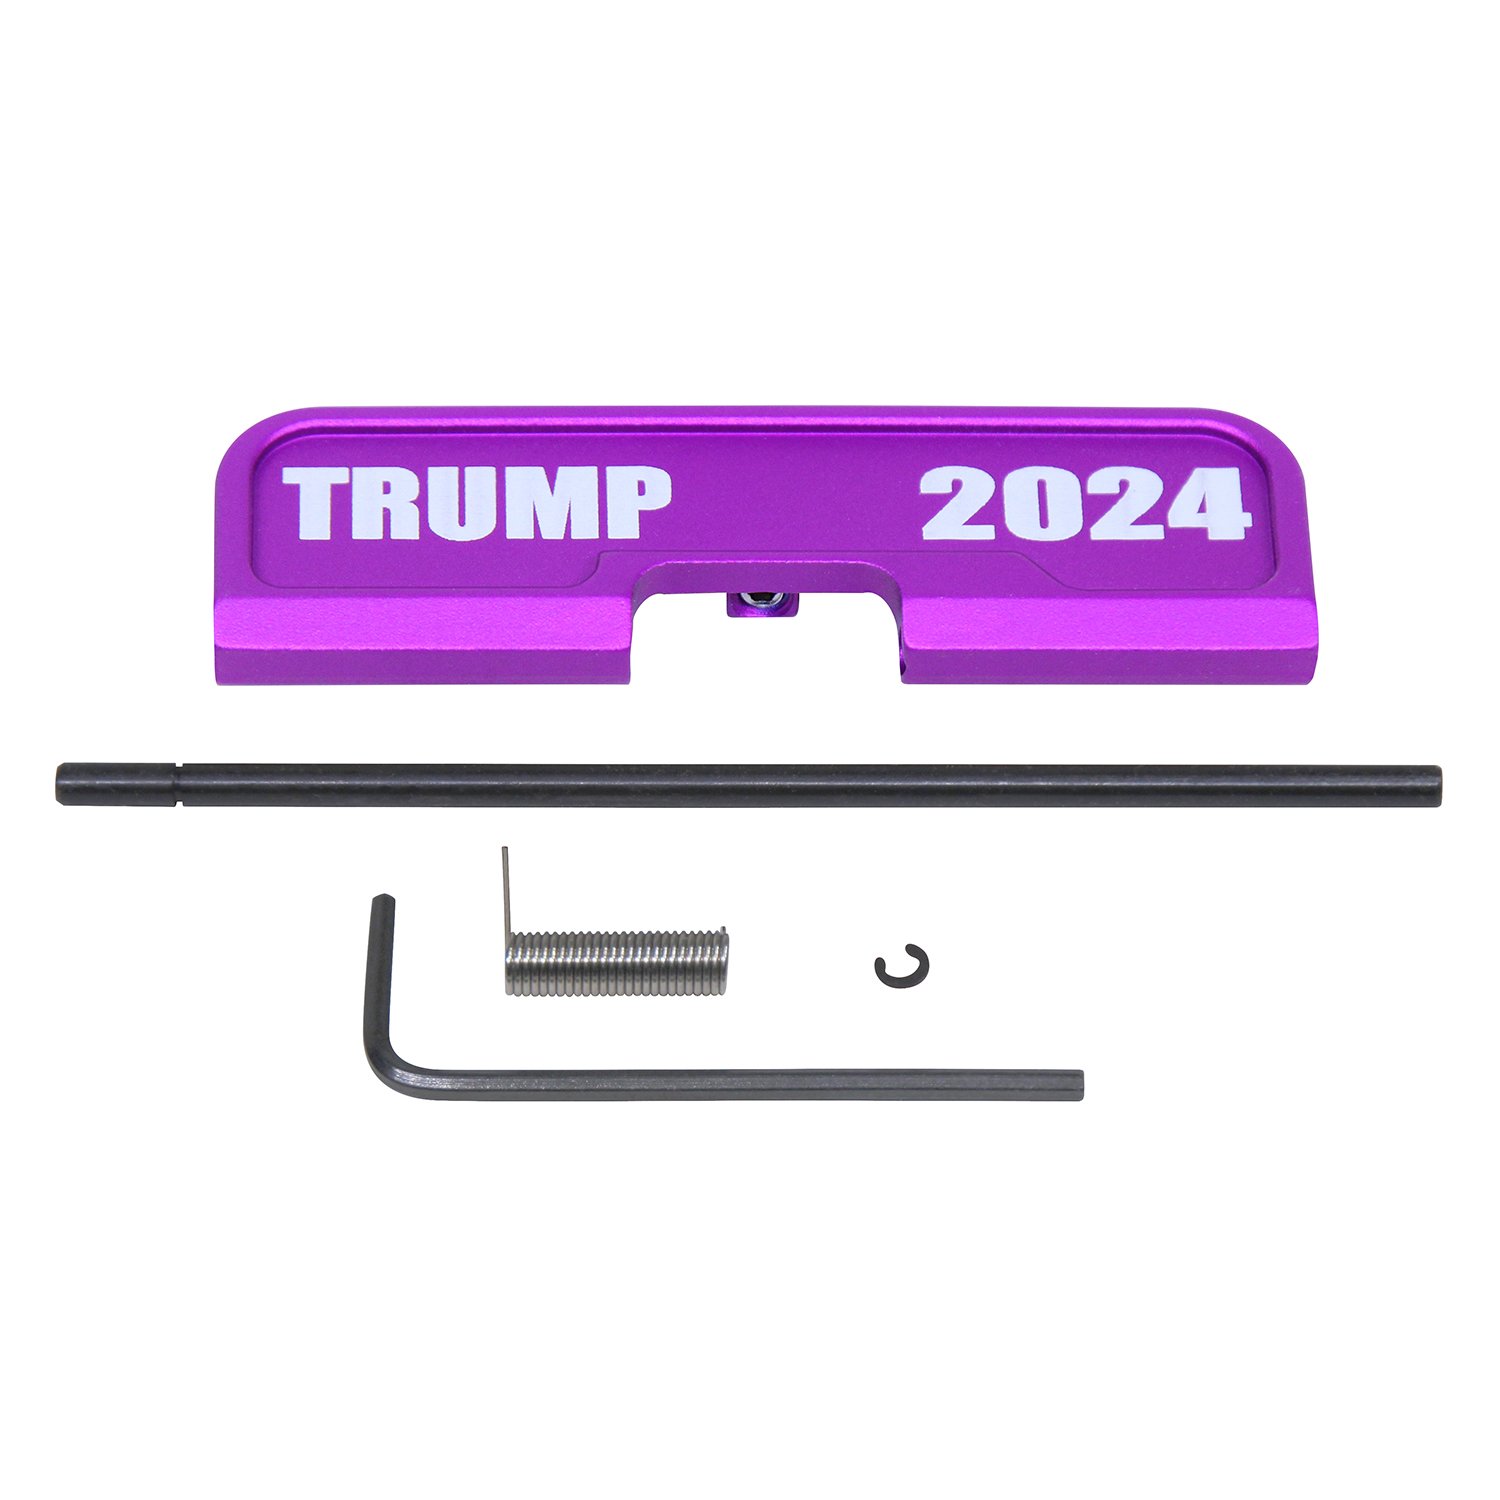 AR-15 Ejection Port Dust Cover TRUMP 2024 in Anodized Purple